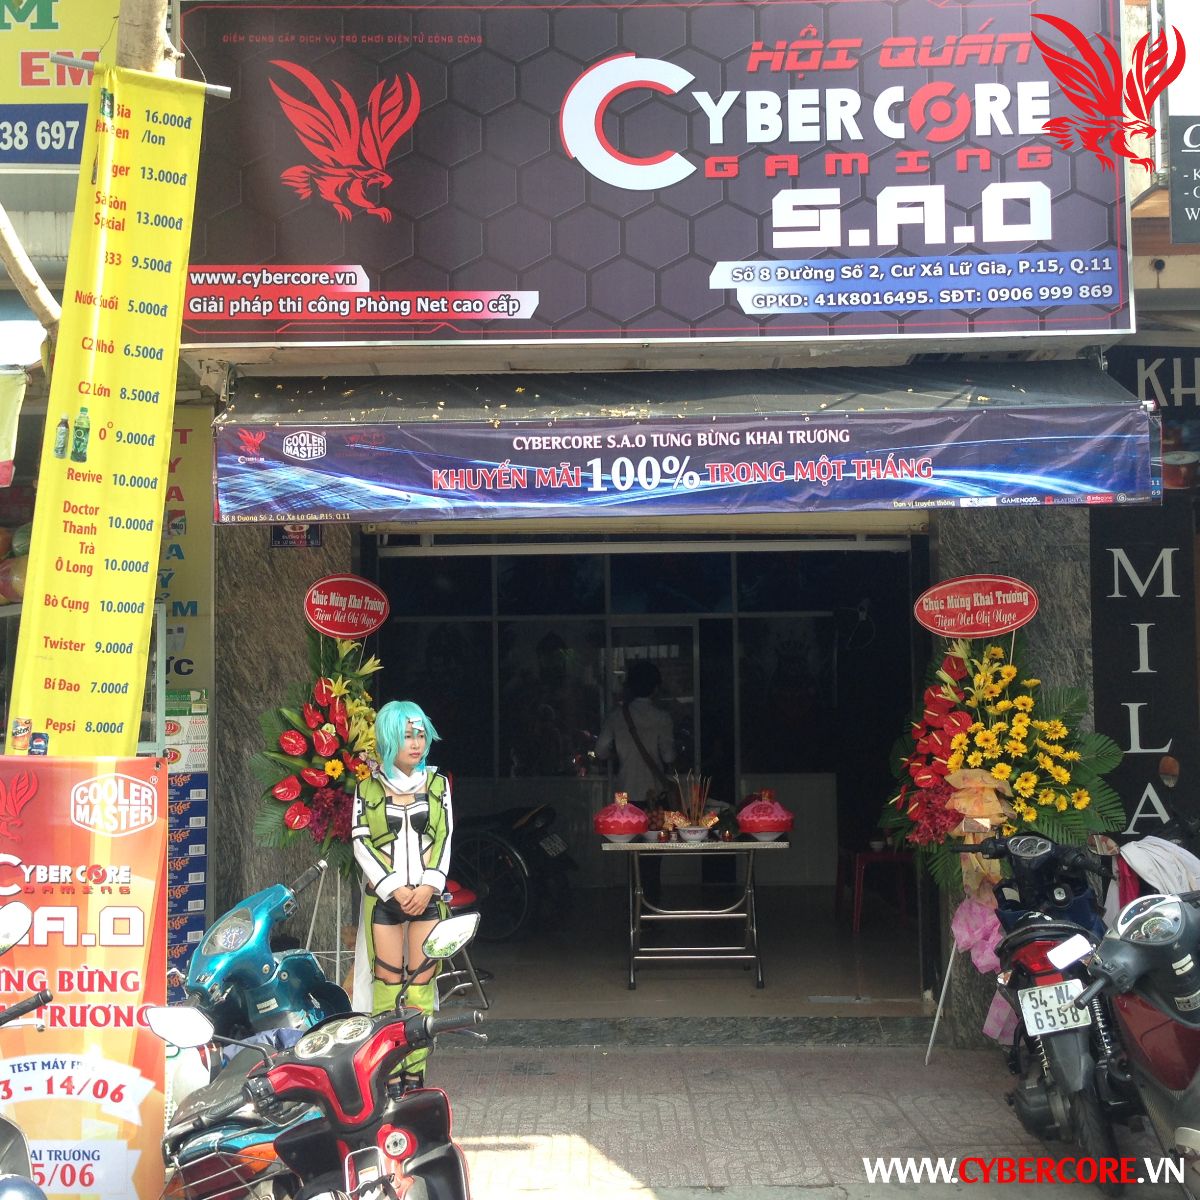 https://img-cdn.2game.vn/pictures/images/2015/6/23/cybercore_sao_1.JPG